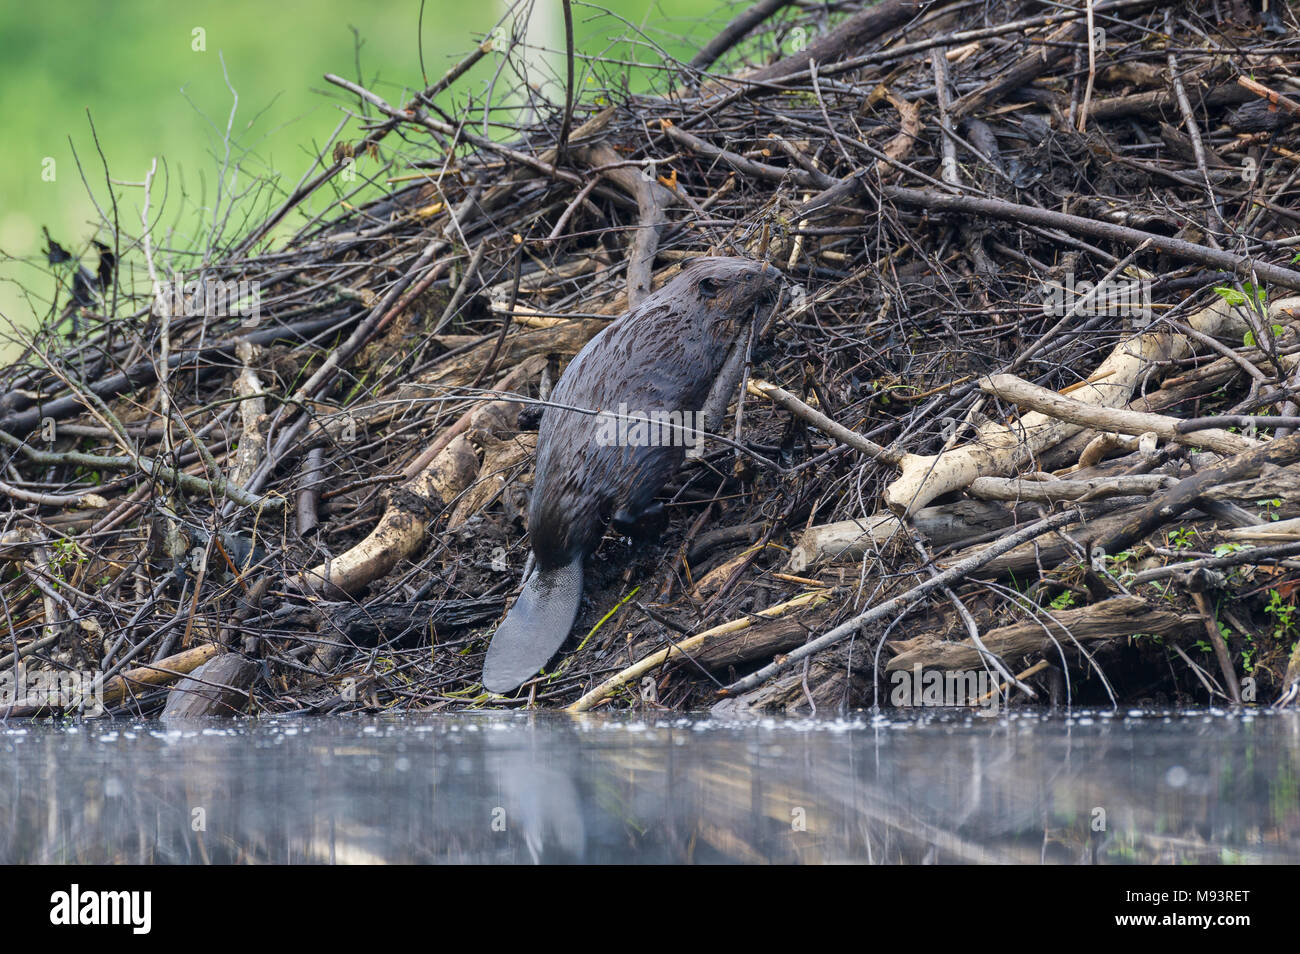 Beaver (Castor canadensis) adding building material to its lodge. William O'Brien State Park, MN, USA, late May, by Dominique Braud/Dembinsky Photo As Stock Photo